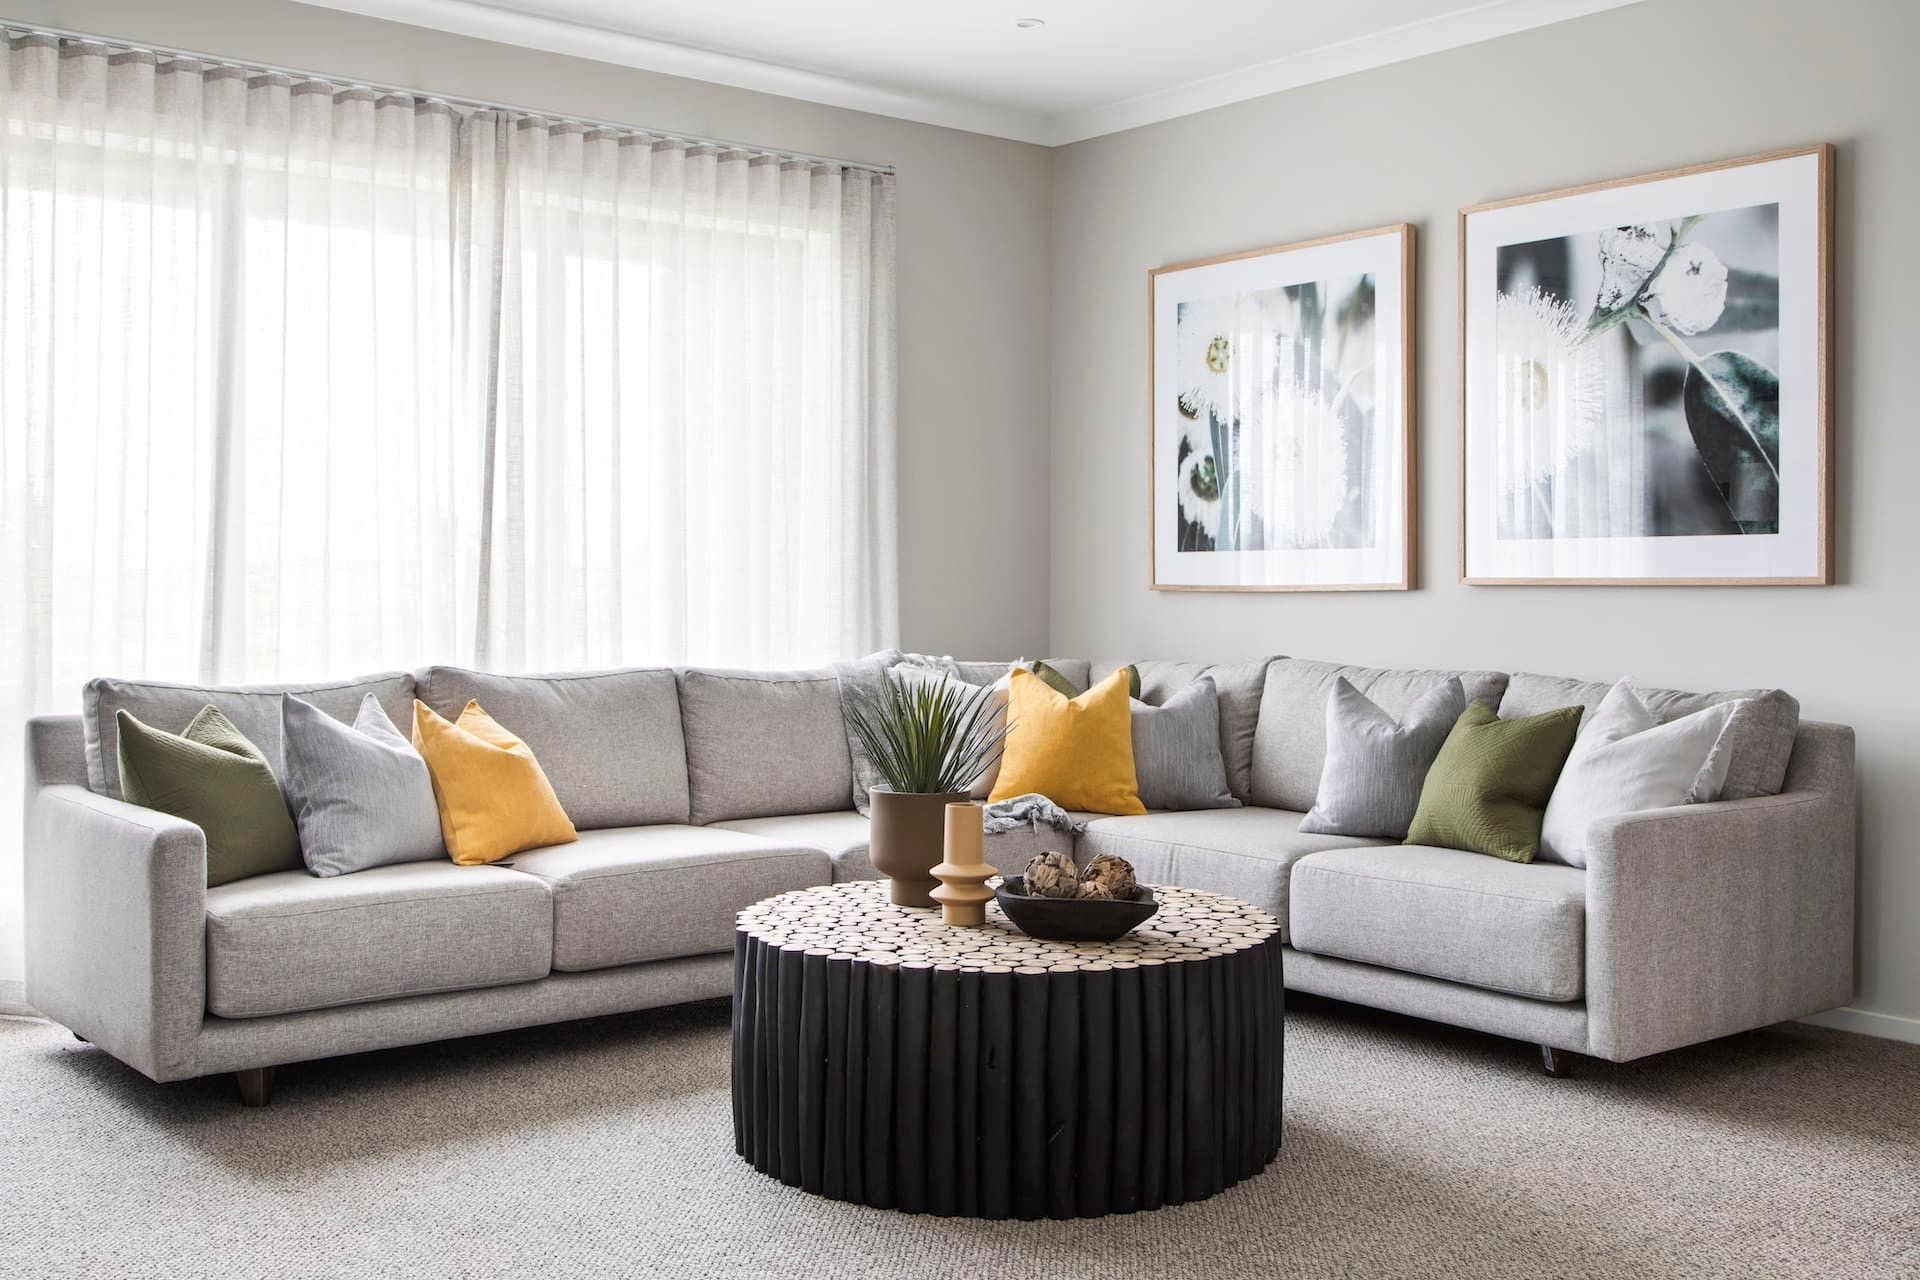 grey sectional sofa with round black timber table and green and yellow cushions